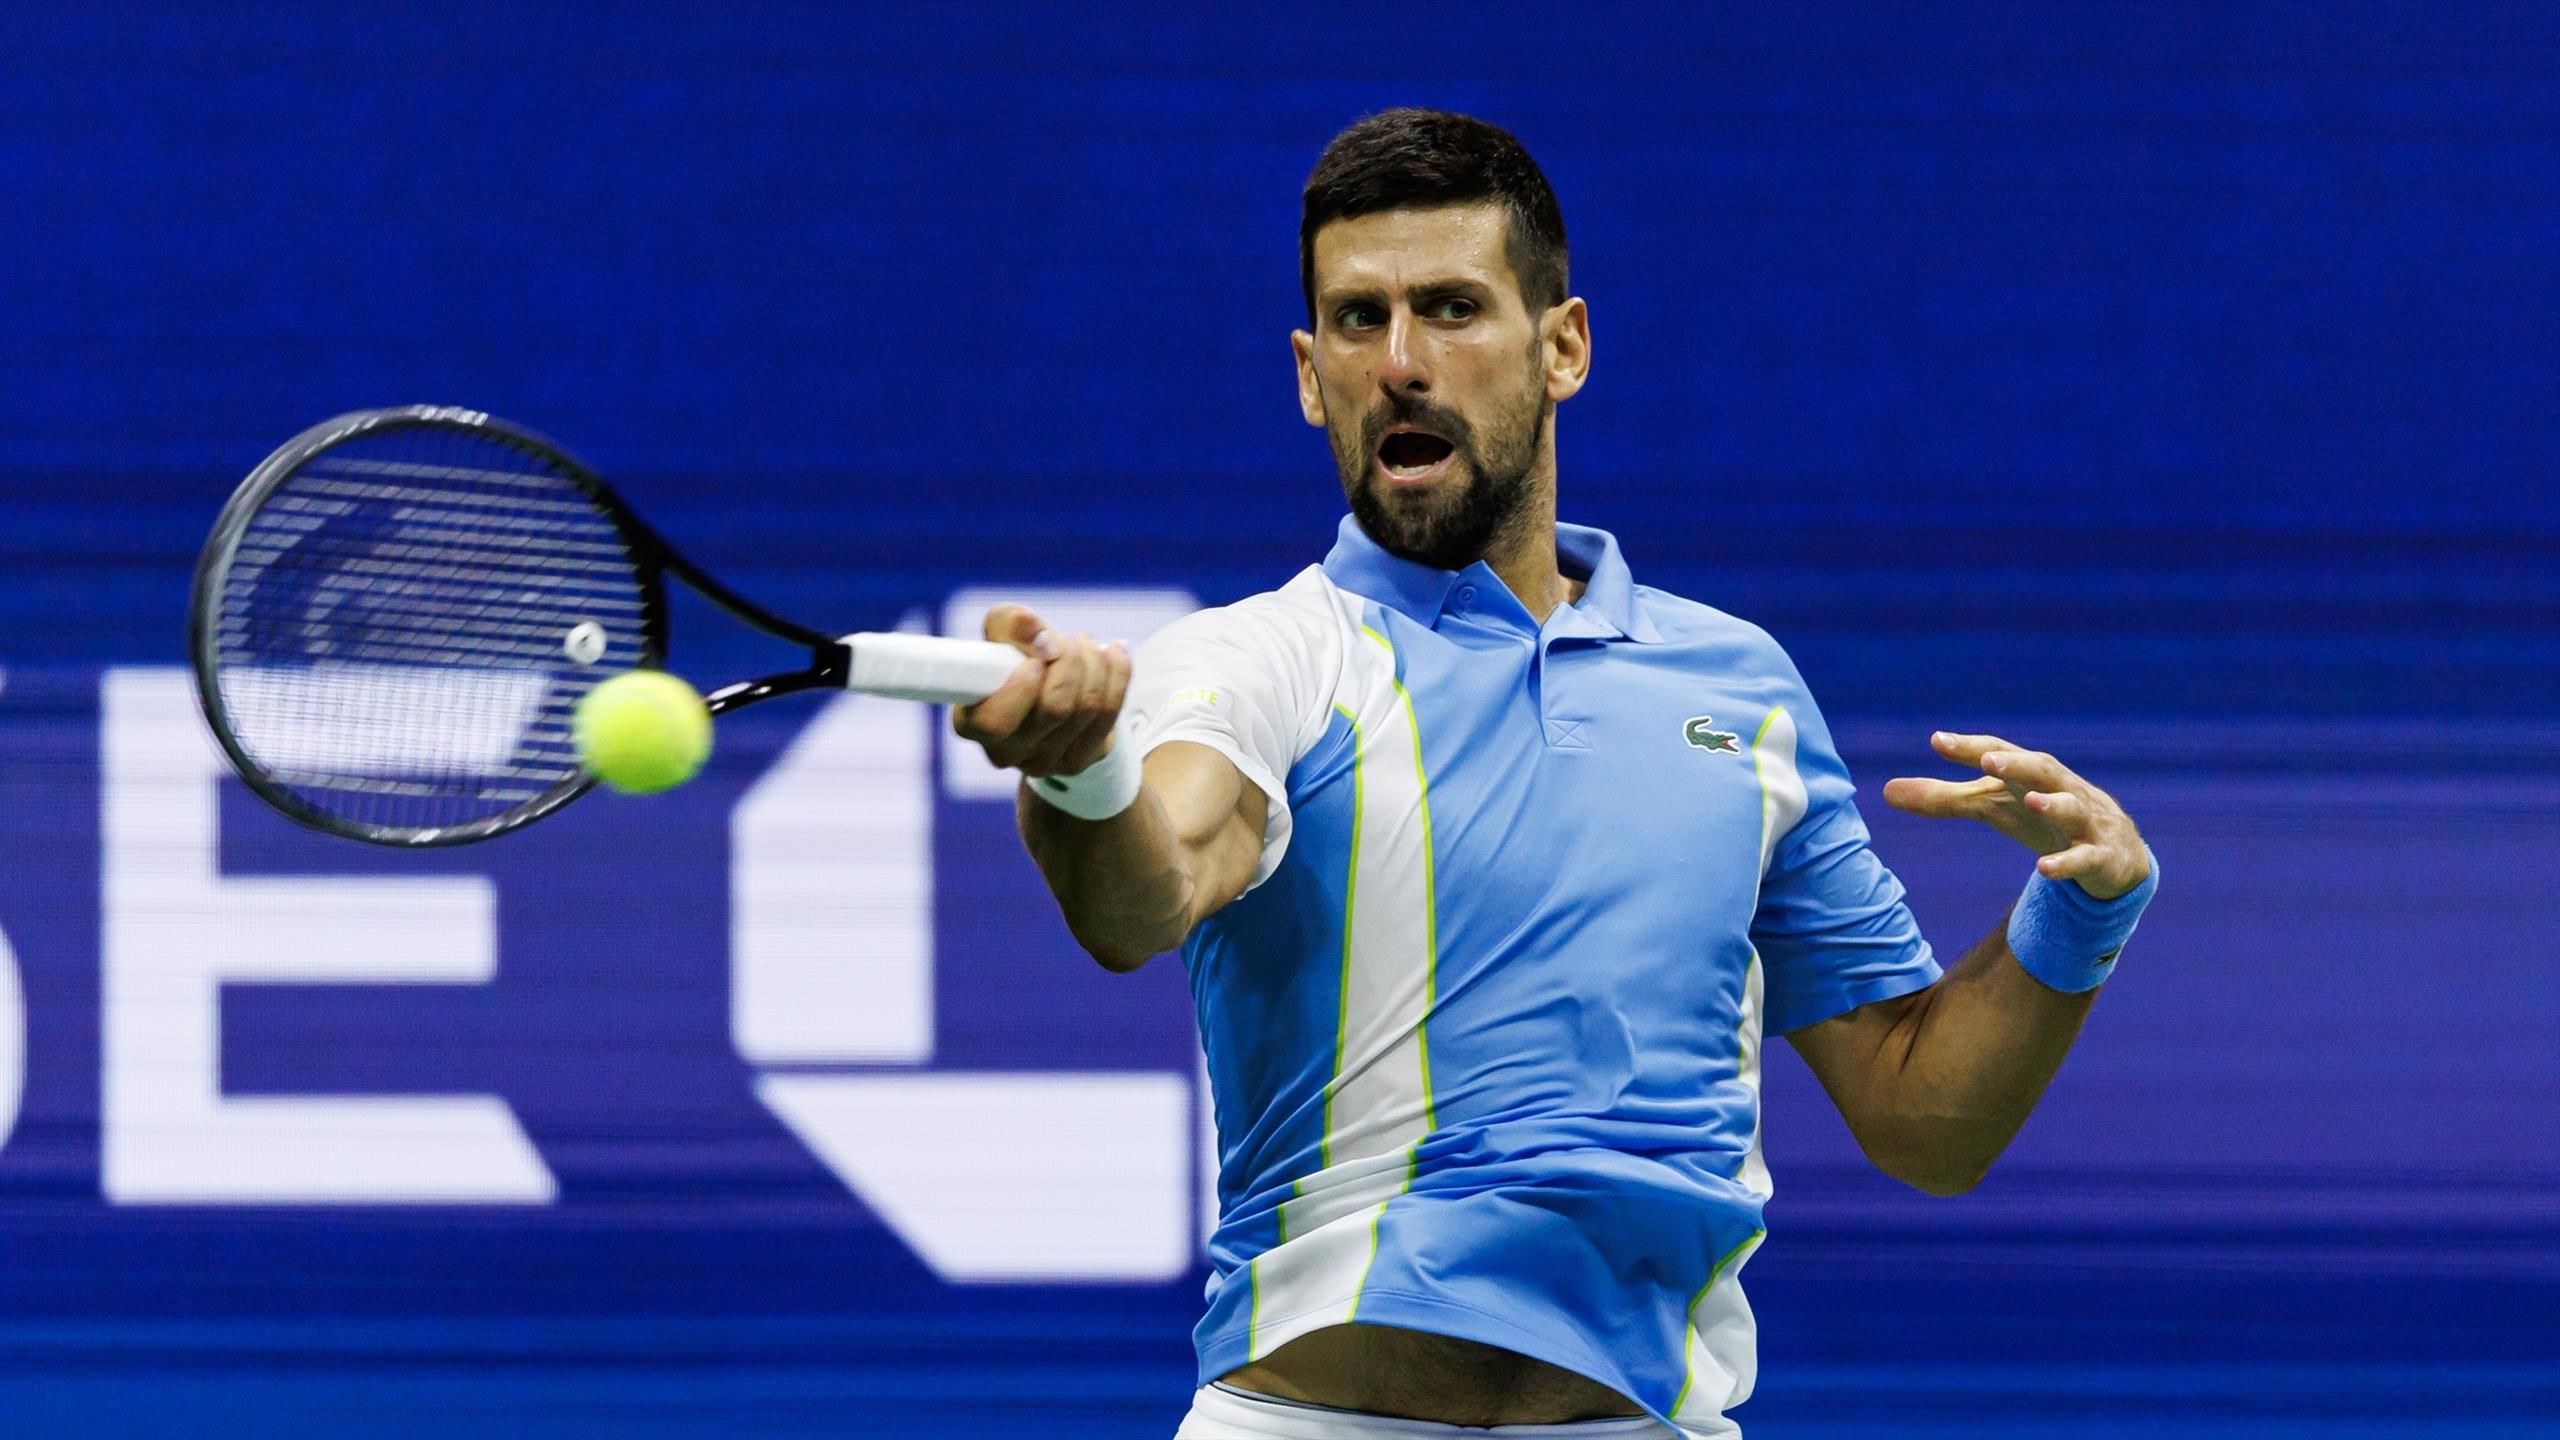 US Open 2023 – Sunday schedules: Djokovic wants 24th Grand Slam title against Medvedev and Siegemund in doubles final